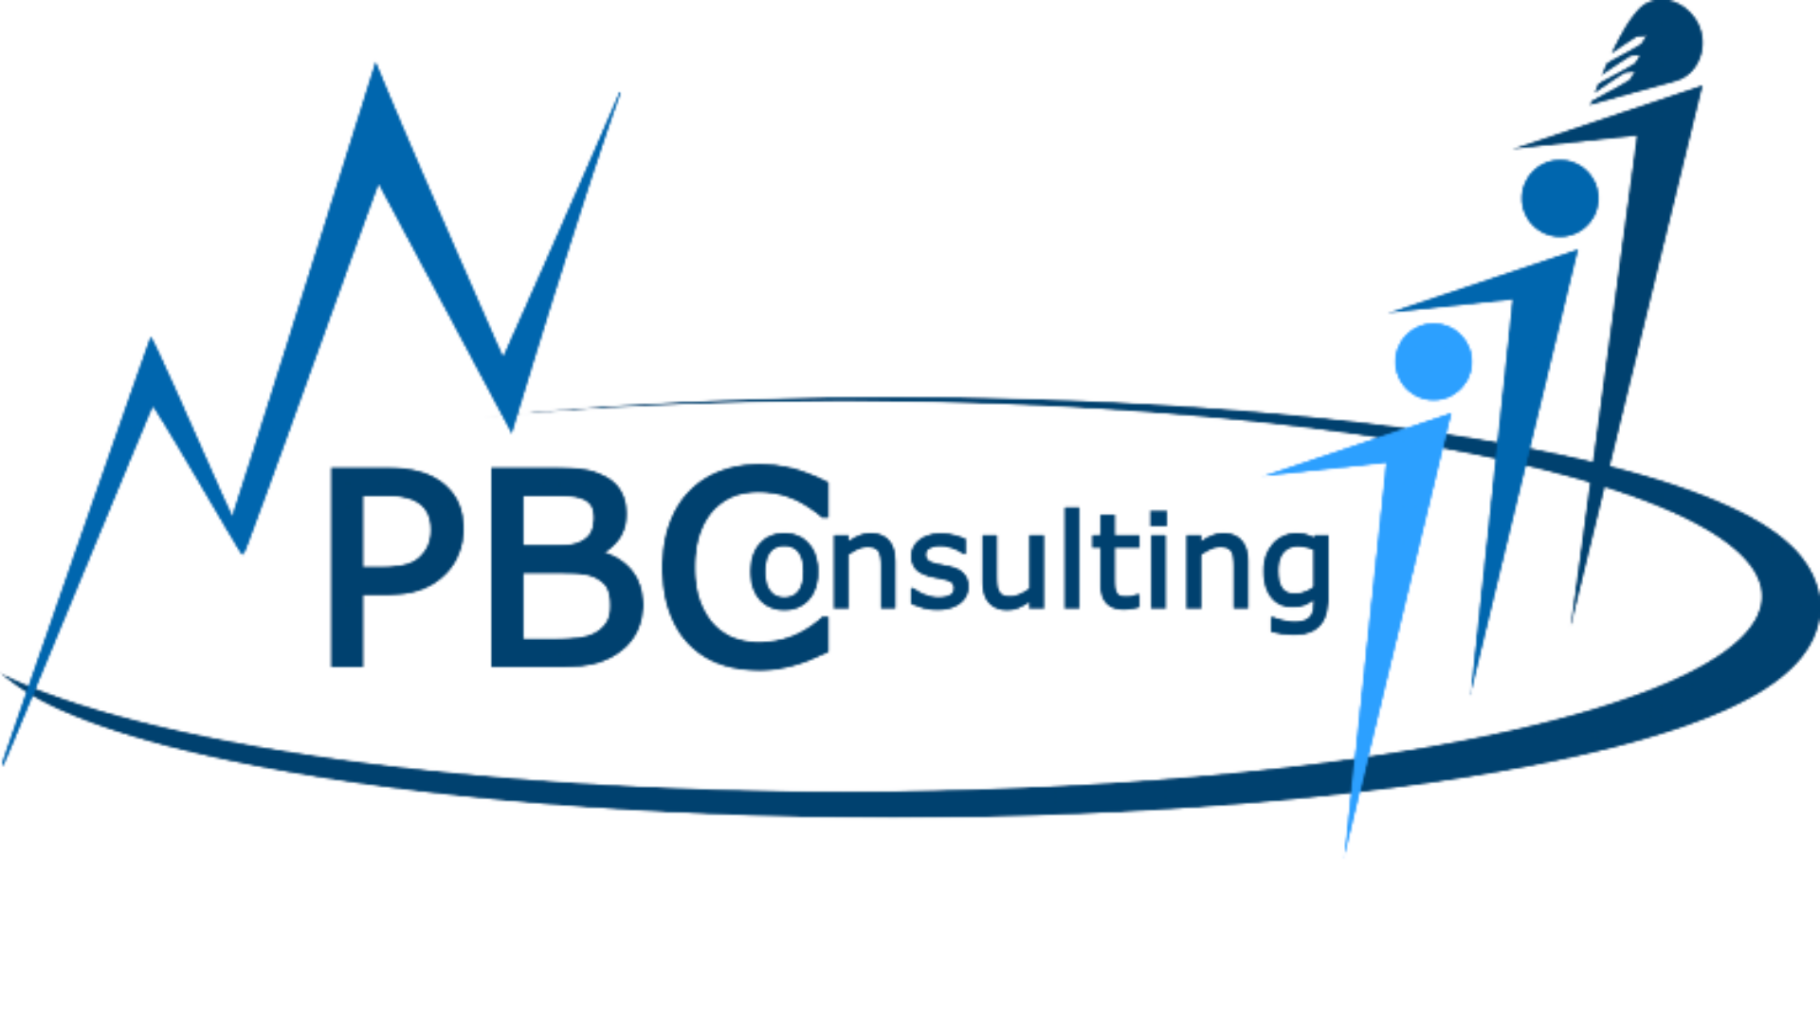 News neues Mitglied PBConsulting